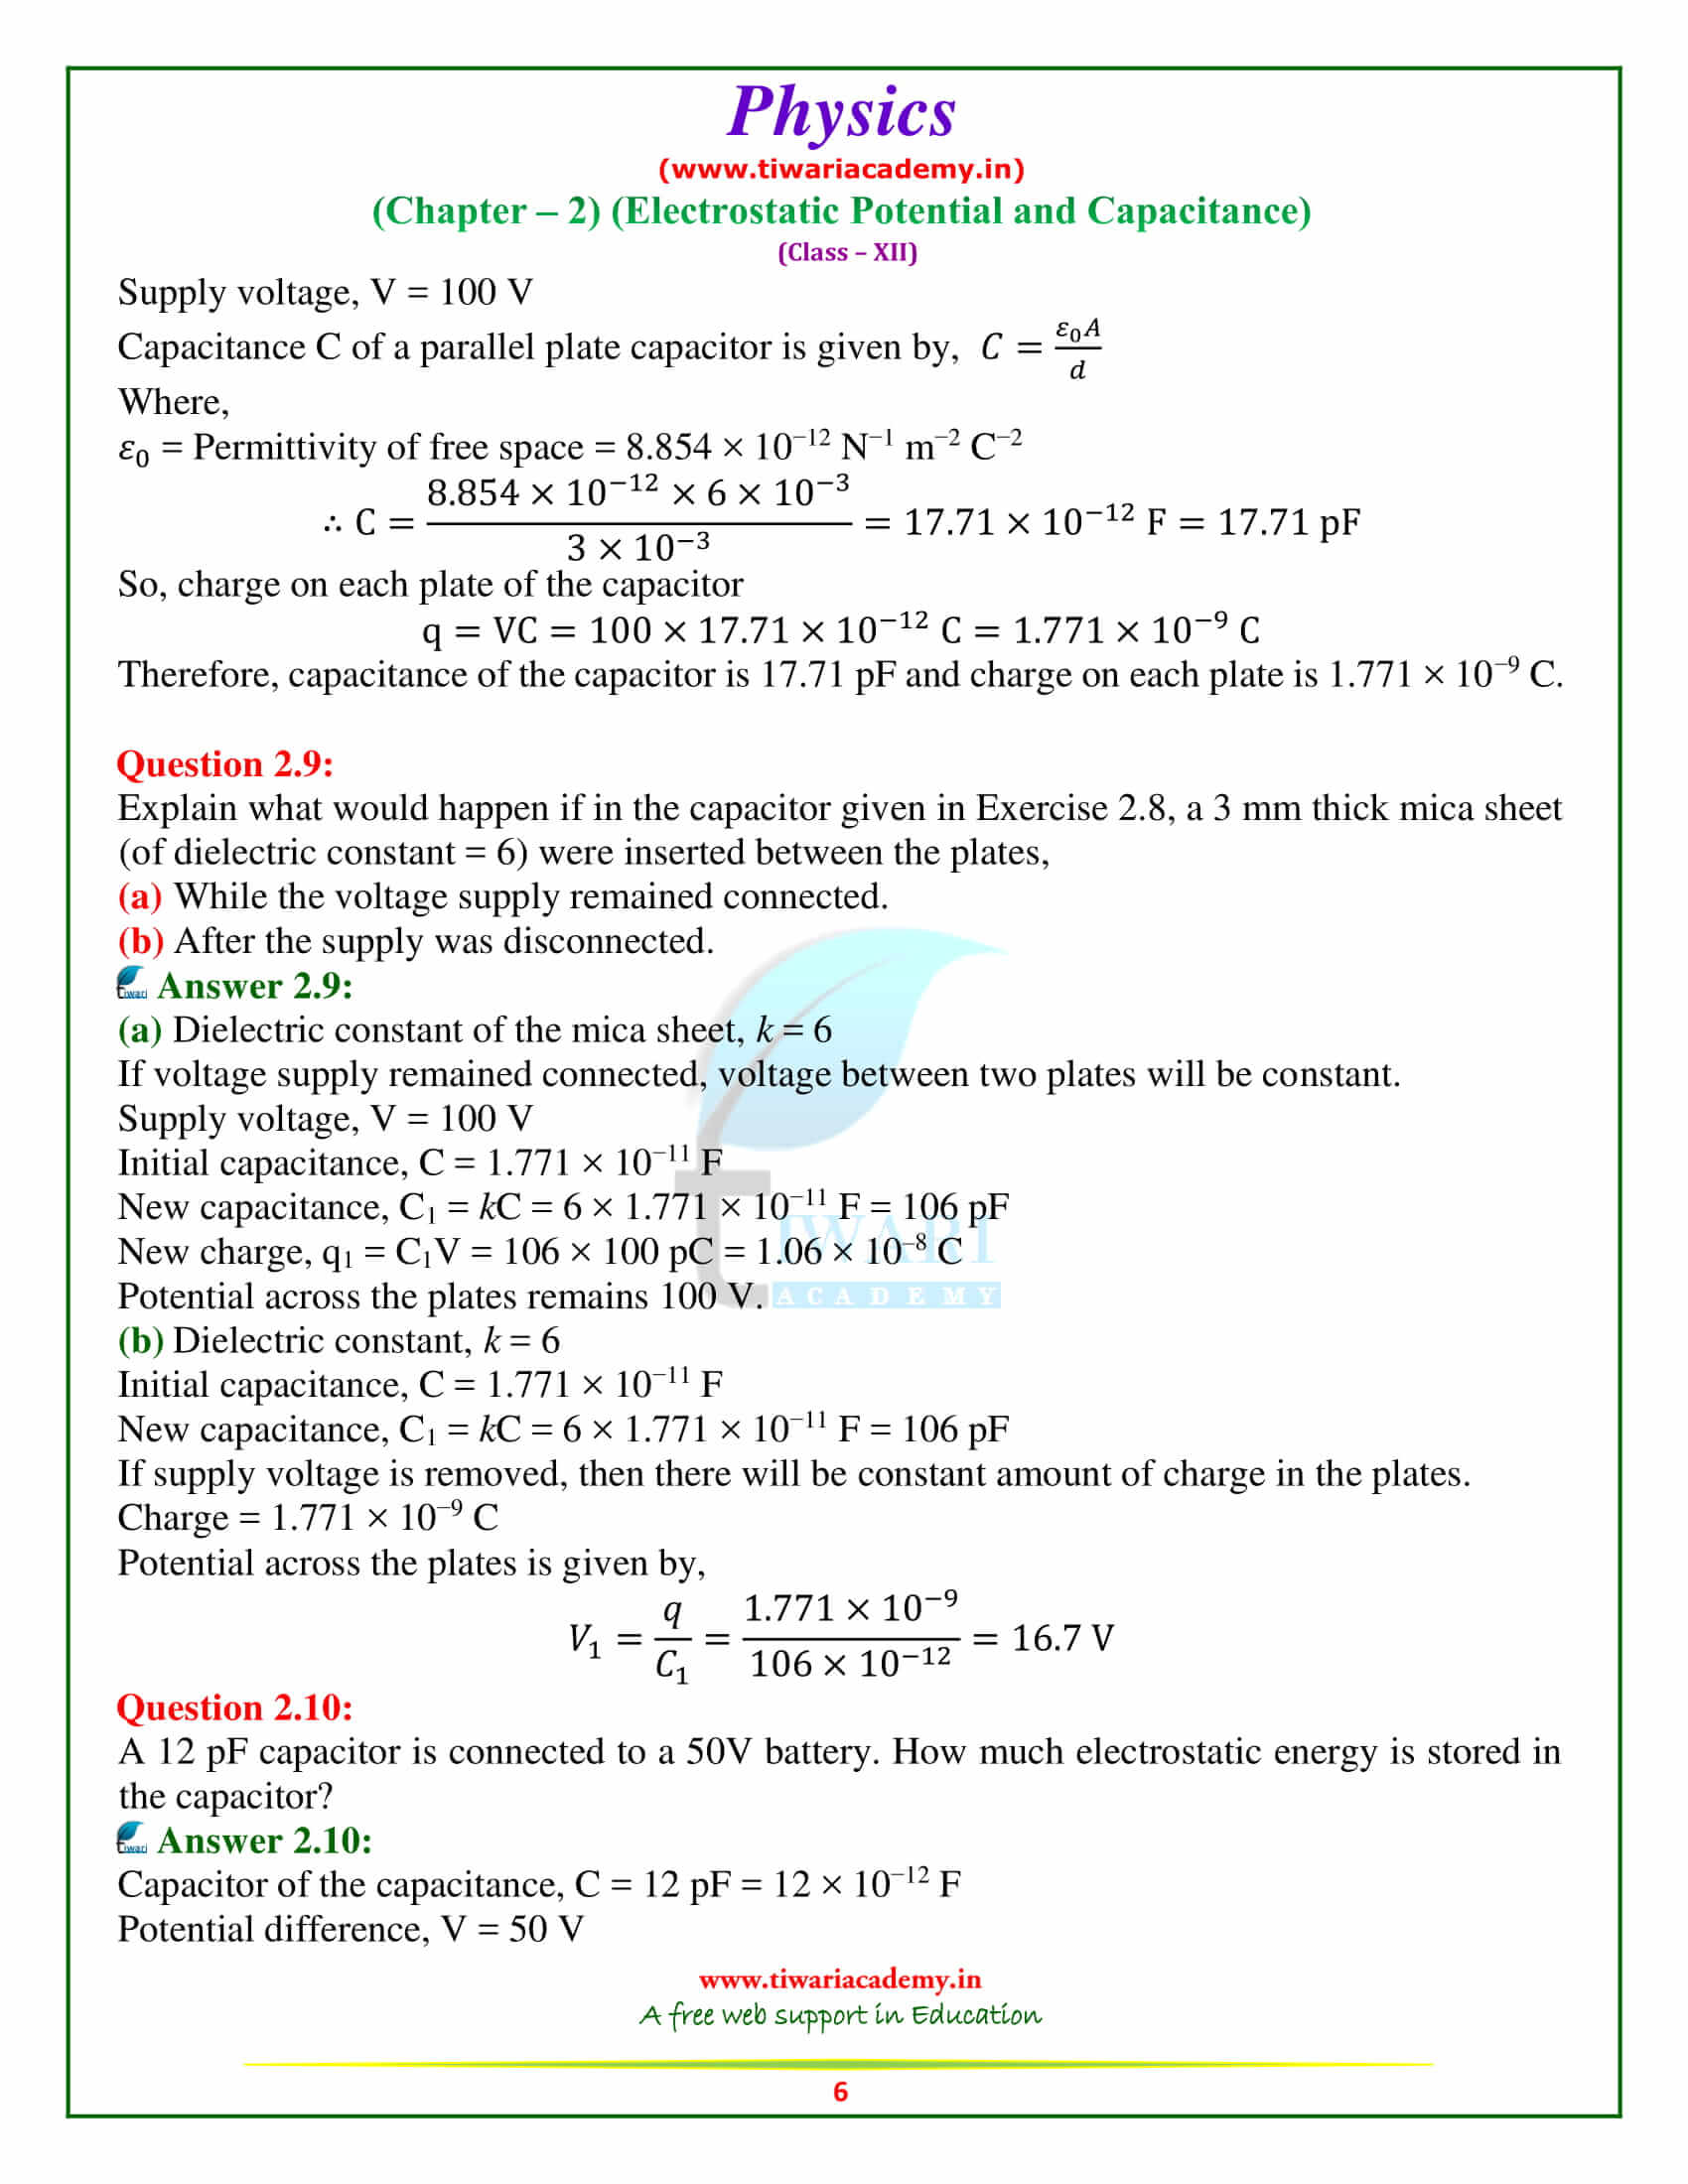 NCERT Solutions for Class 12 Physics Chapter 2 for 2018-19